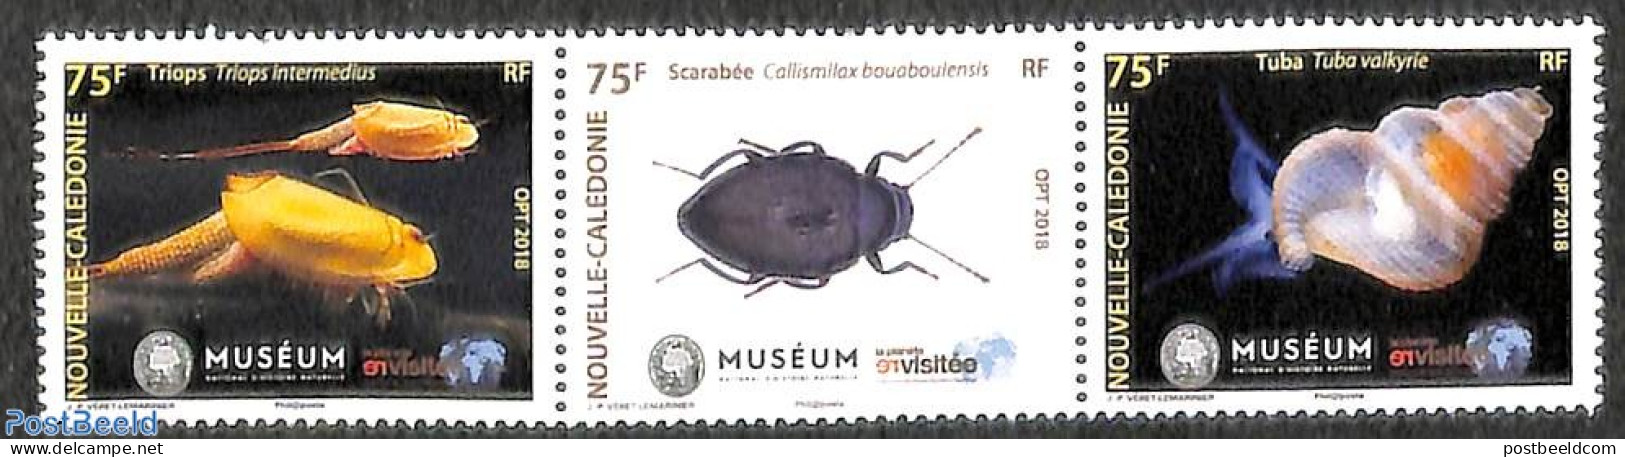 New Caledonia 2018 Museum Revisitee 3v [::], Mint NH, Nature - Insects - Shells & Crustaceans - Art - Museums - Neufs